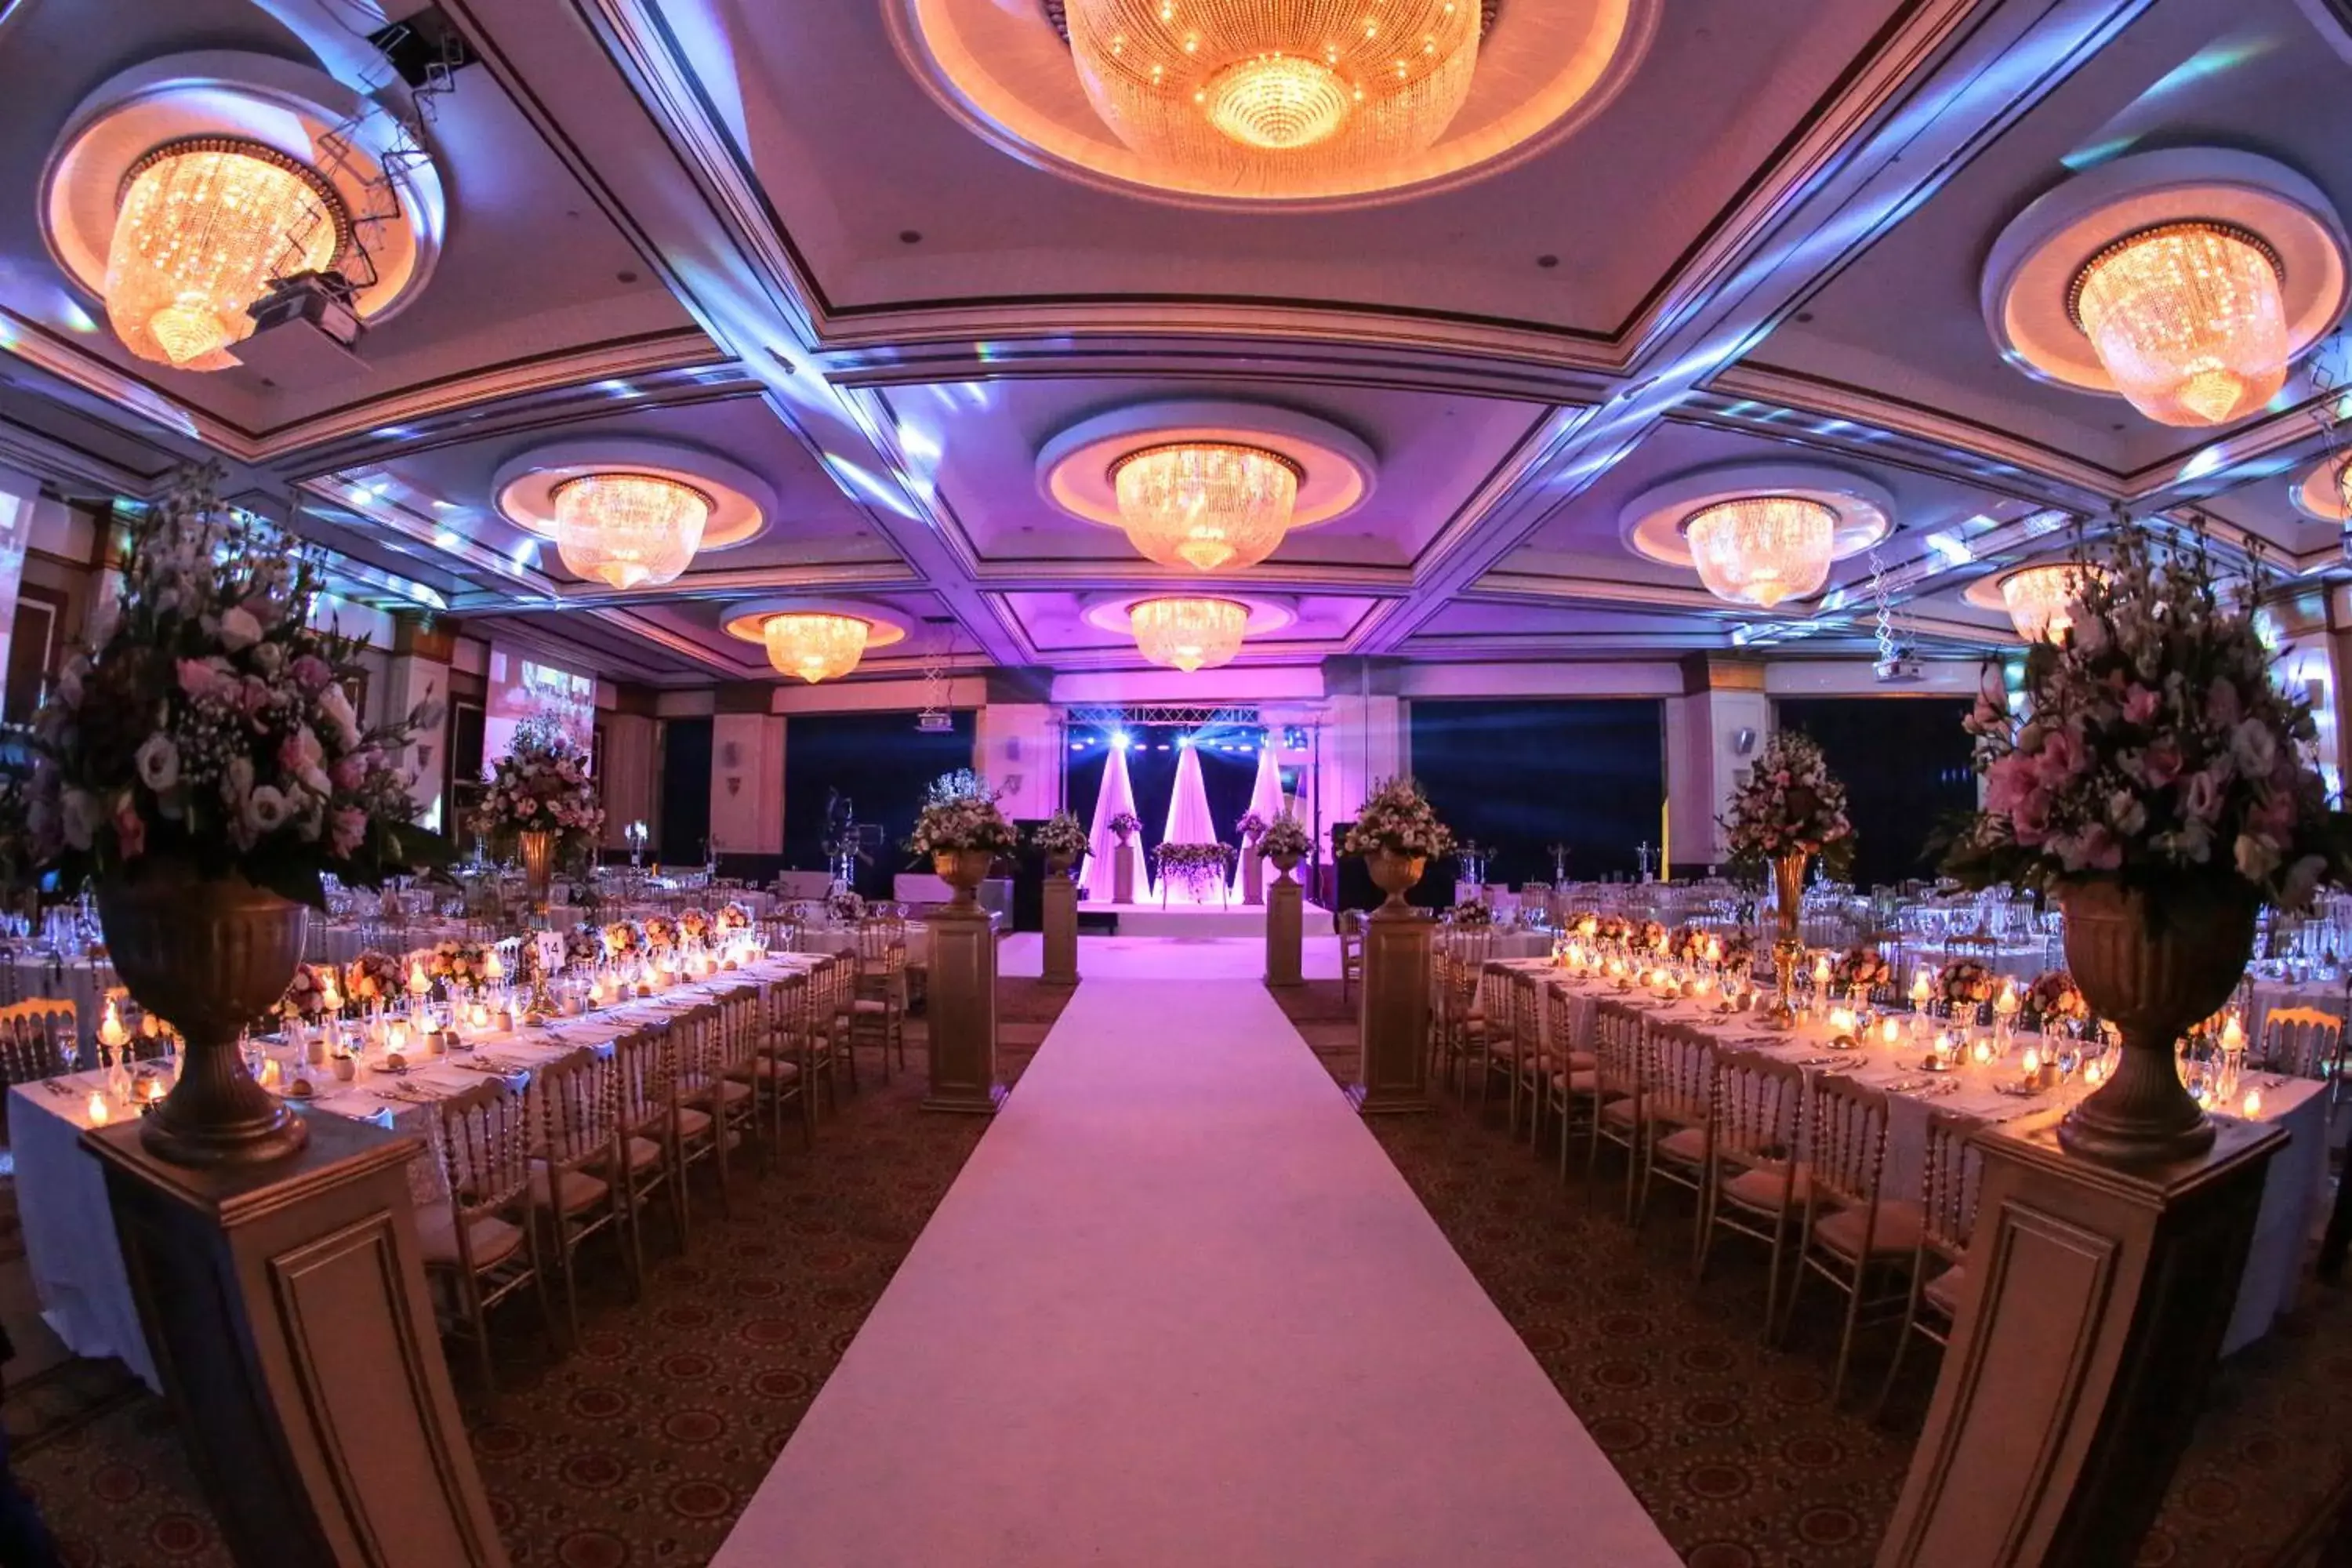 Banquet/Function facilities, Banquet Facilities in Crowne Plaza Istanbul Asia, an IHG Hotel